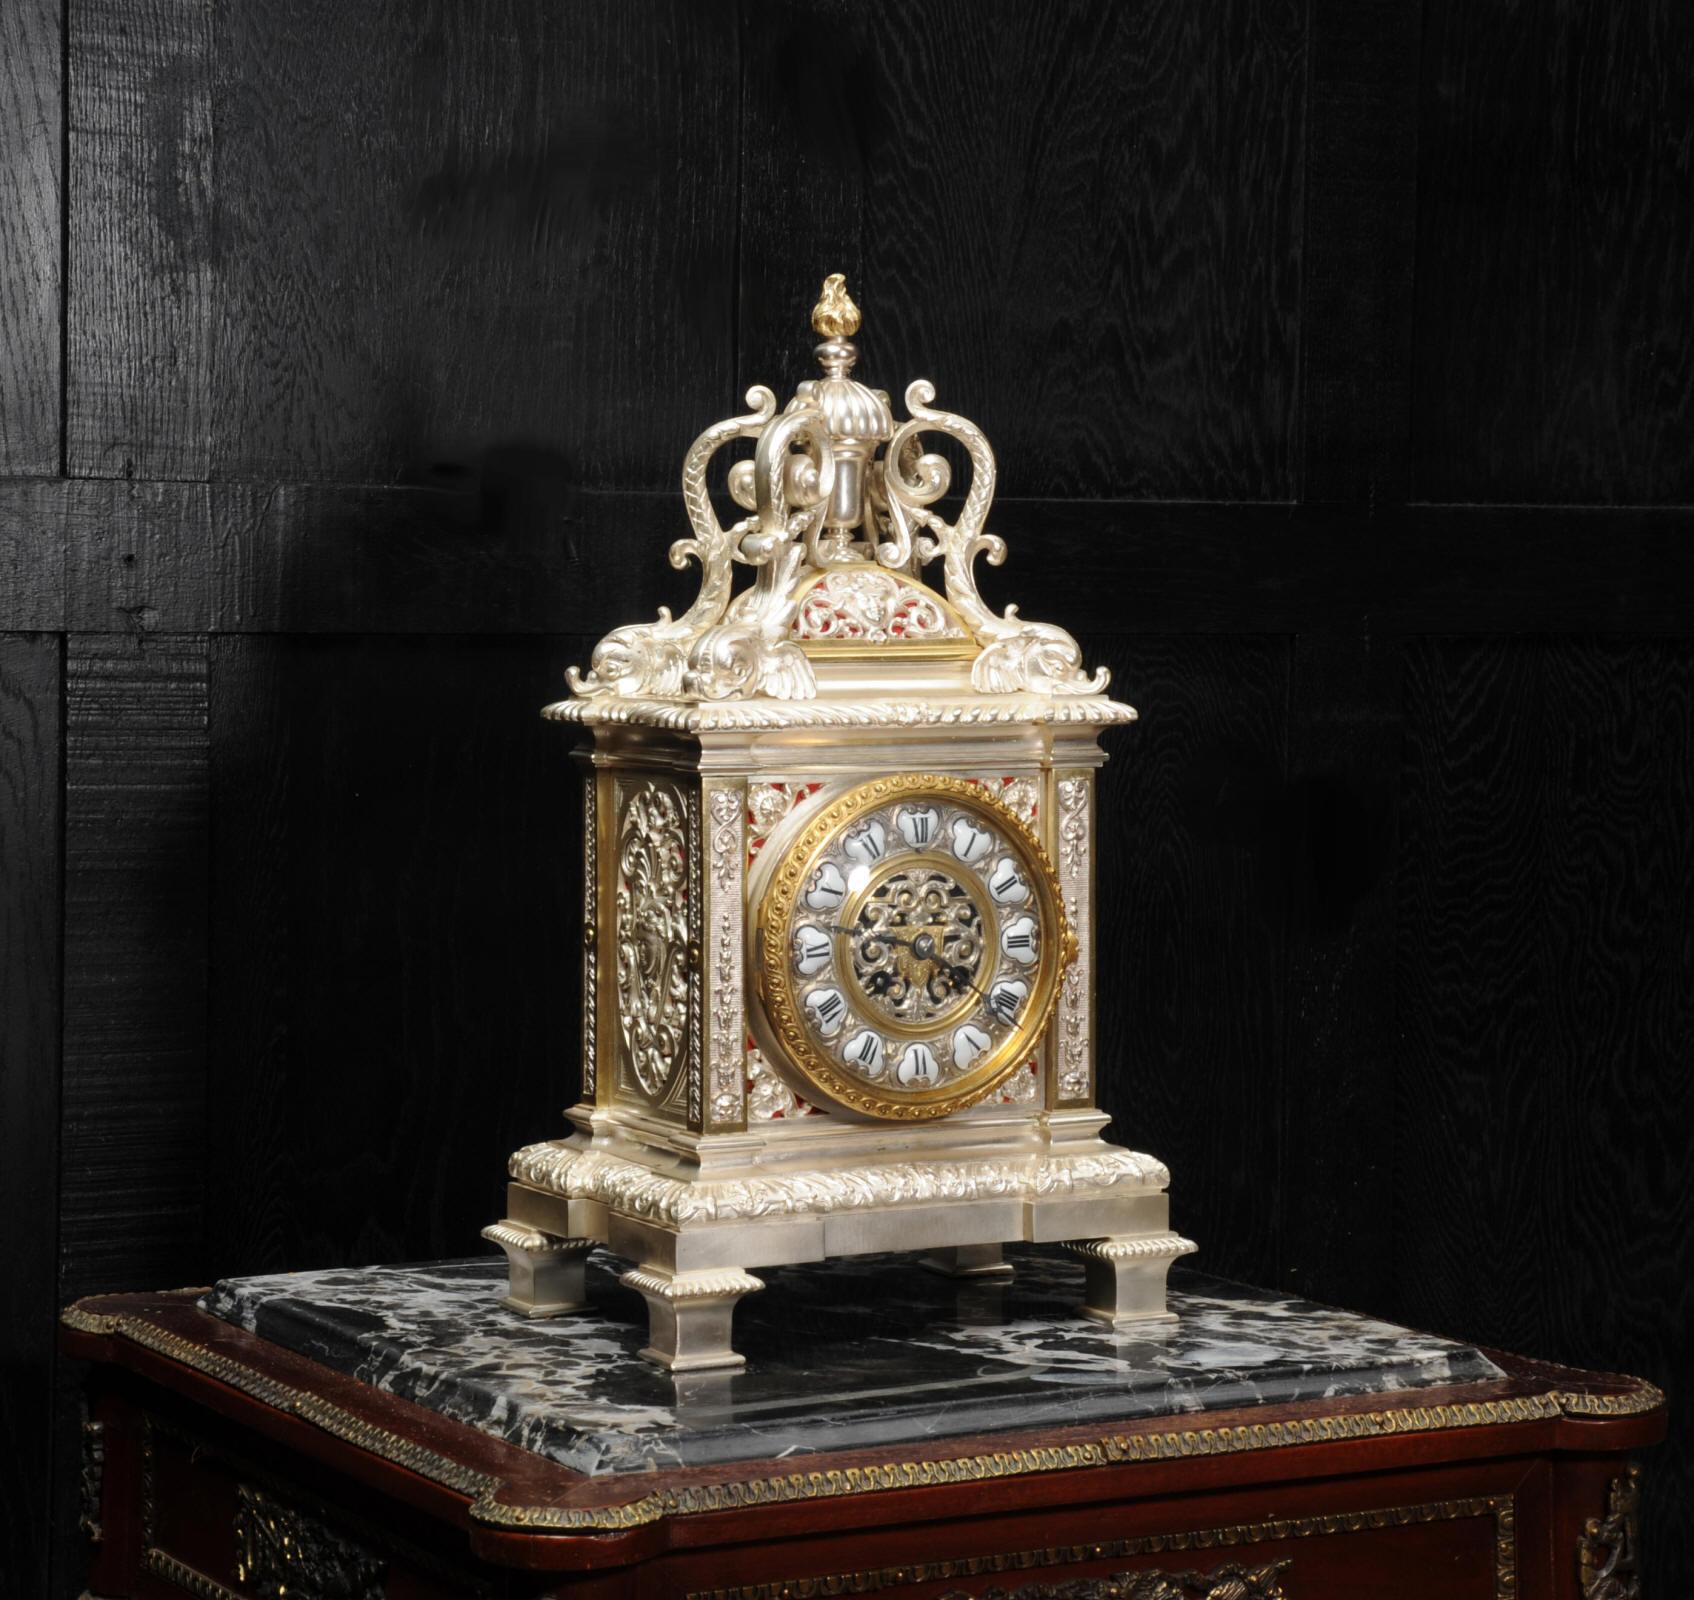 A beautiful and unusual bronze bracket clock, Baroque in style and silver plated with contrasting gild. It is profusely decorated with fabric backed fretted panels with goddess masks, cornucopia and stylised acanthus. To the top are four beautifully